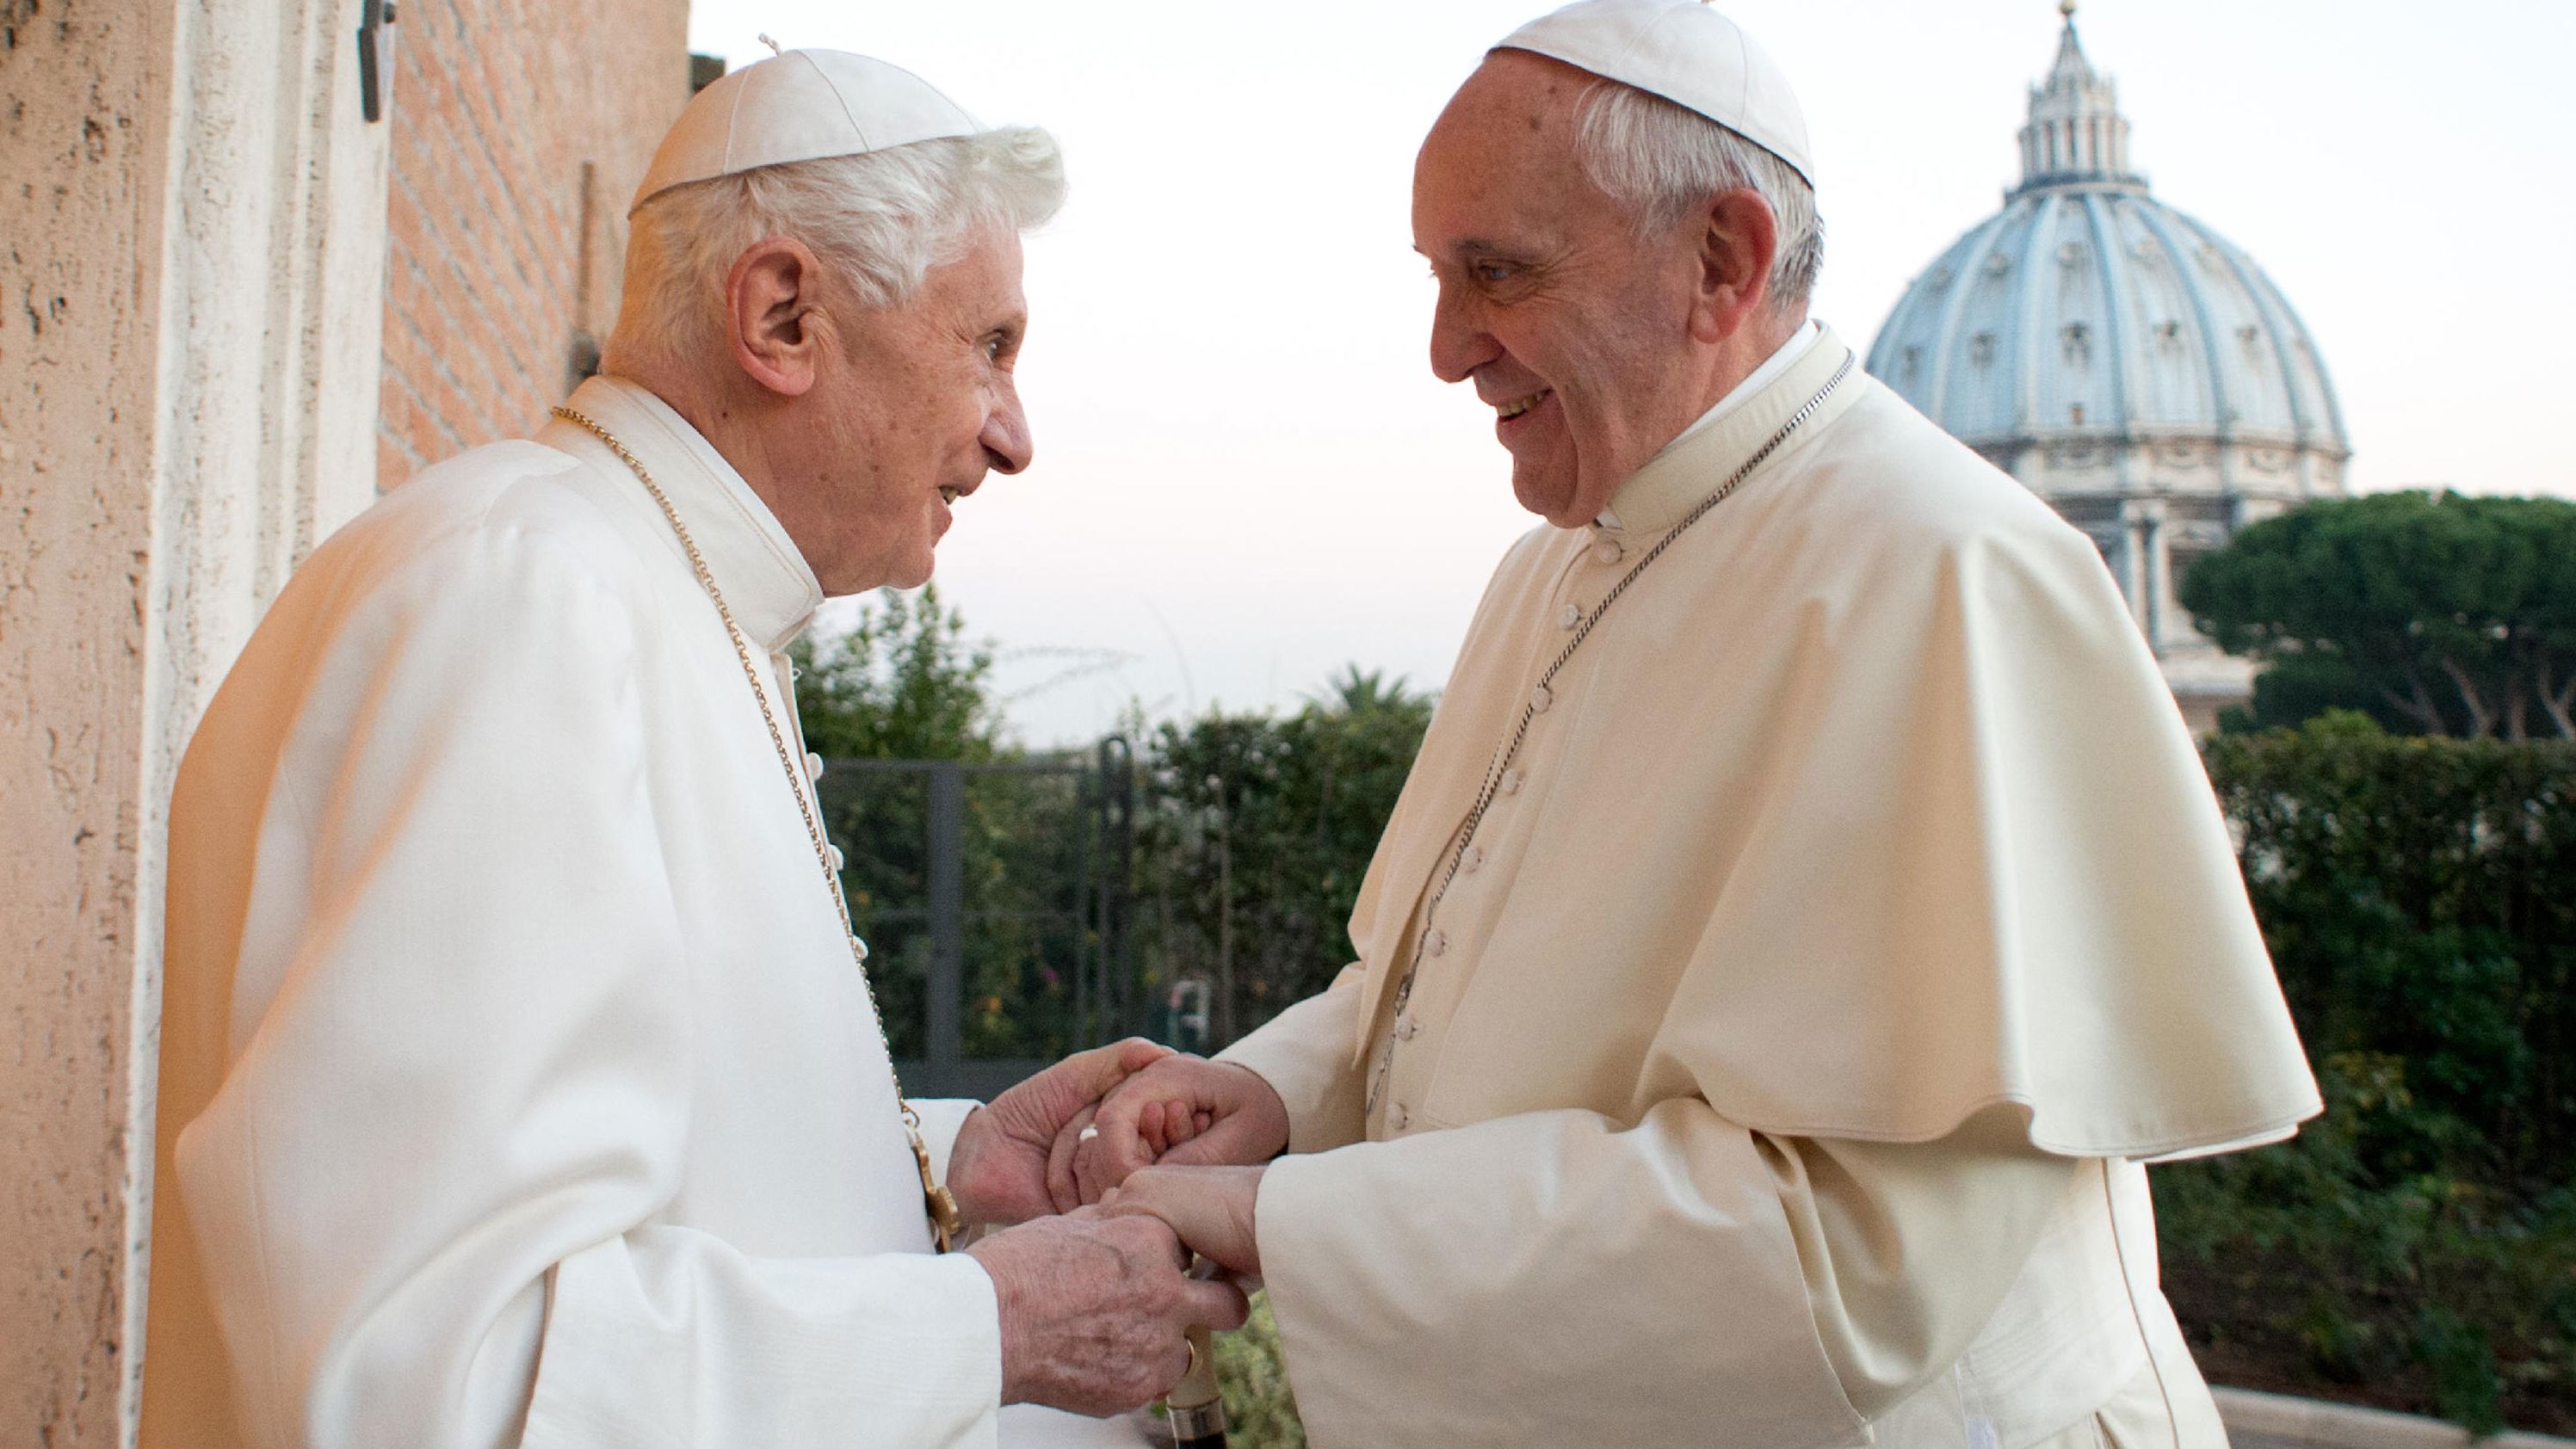 Benedict exchanges Christmas greetings with his successor, Pope Francis, at the Vatican in December 2013.